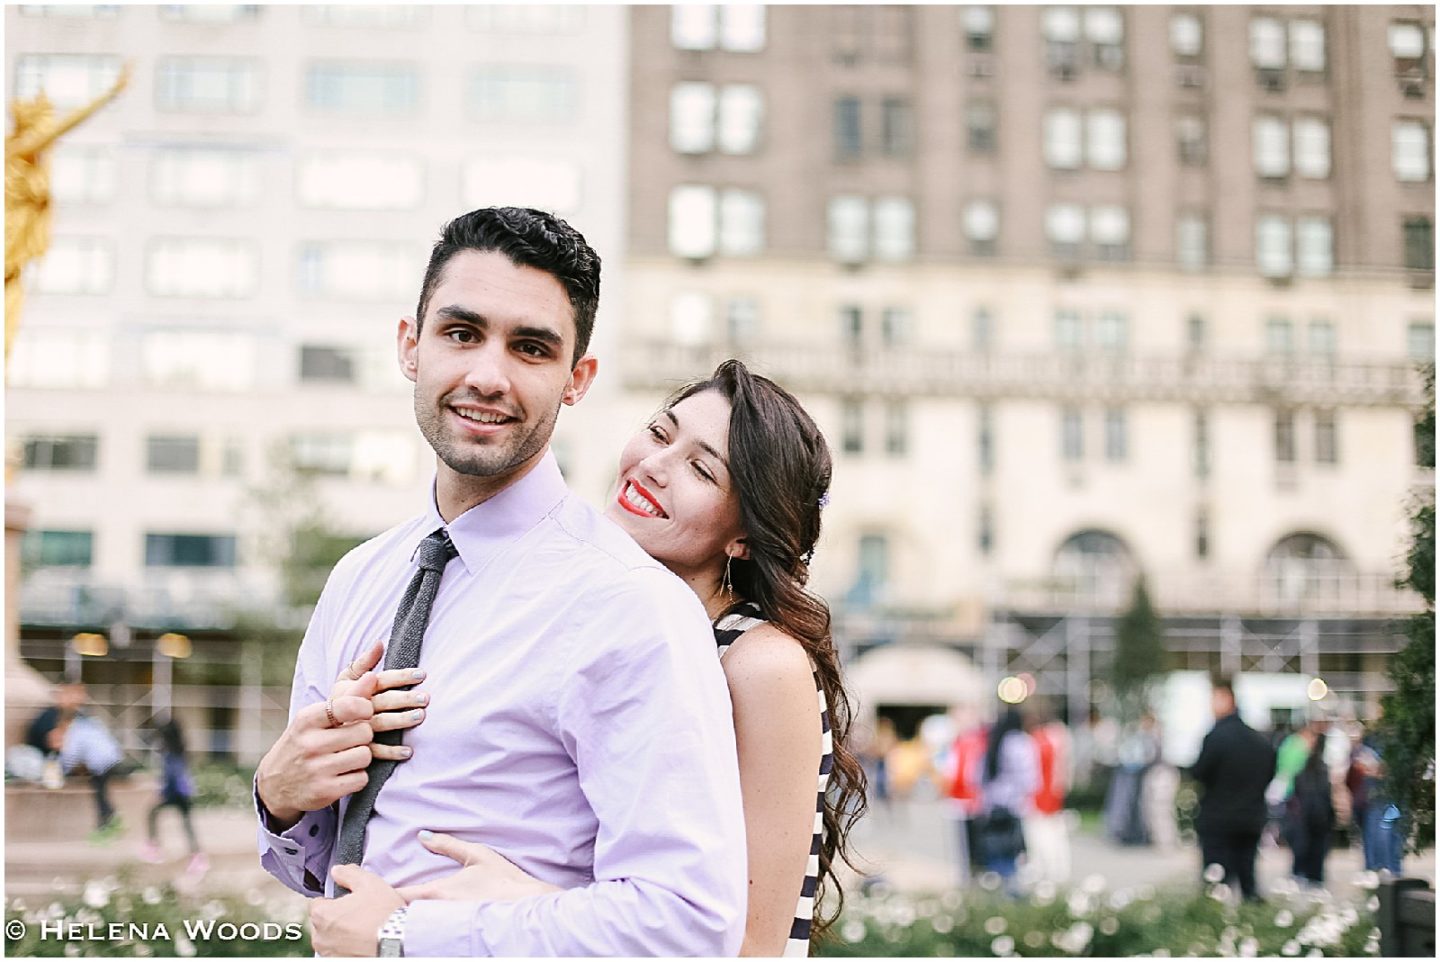 Couples Engagement Photo Session in Central Park Grand Army Plaza by NYC photographer Helena Woods